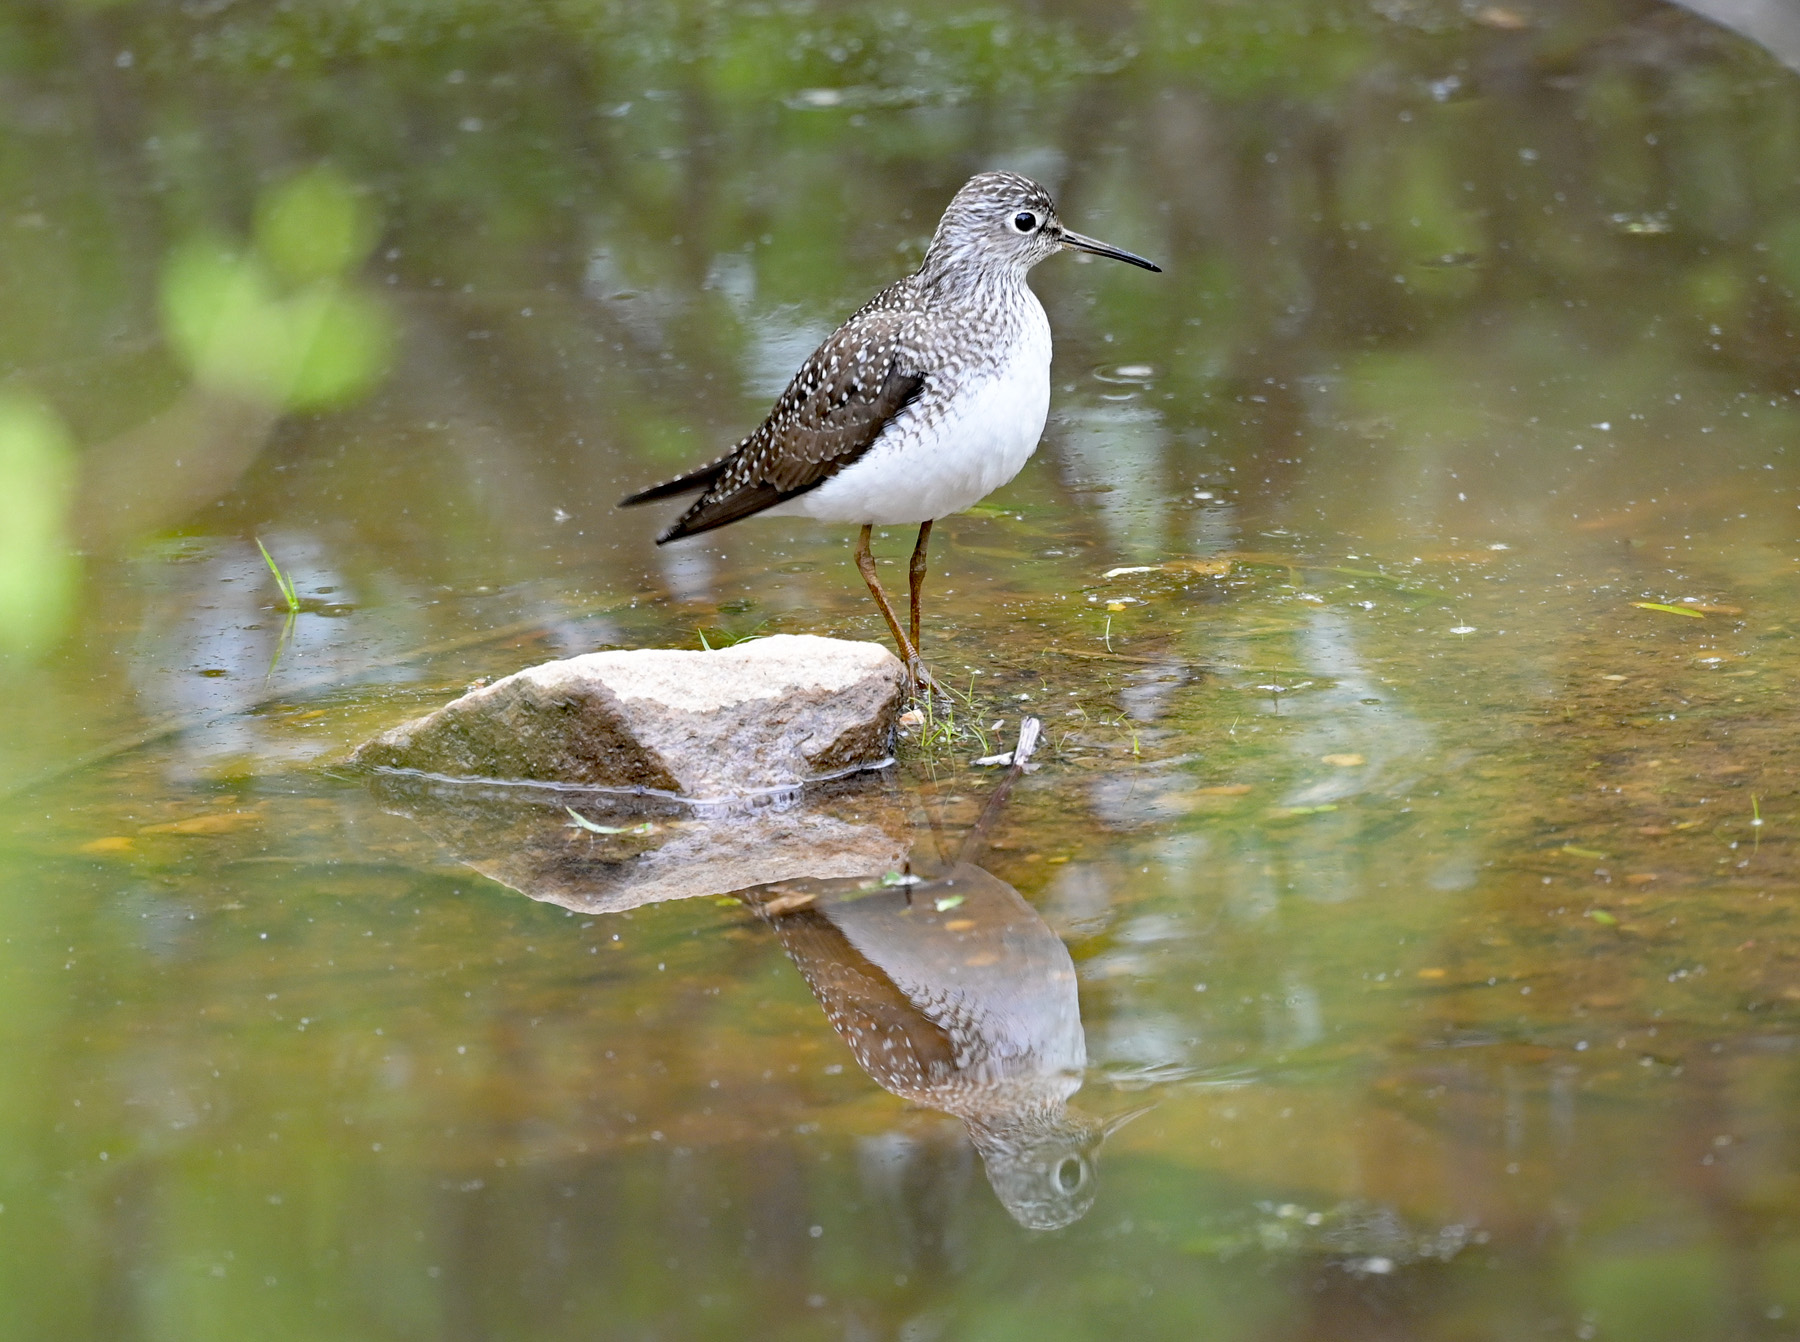 A solitary sandpiper walks in shallow water.